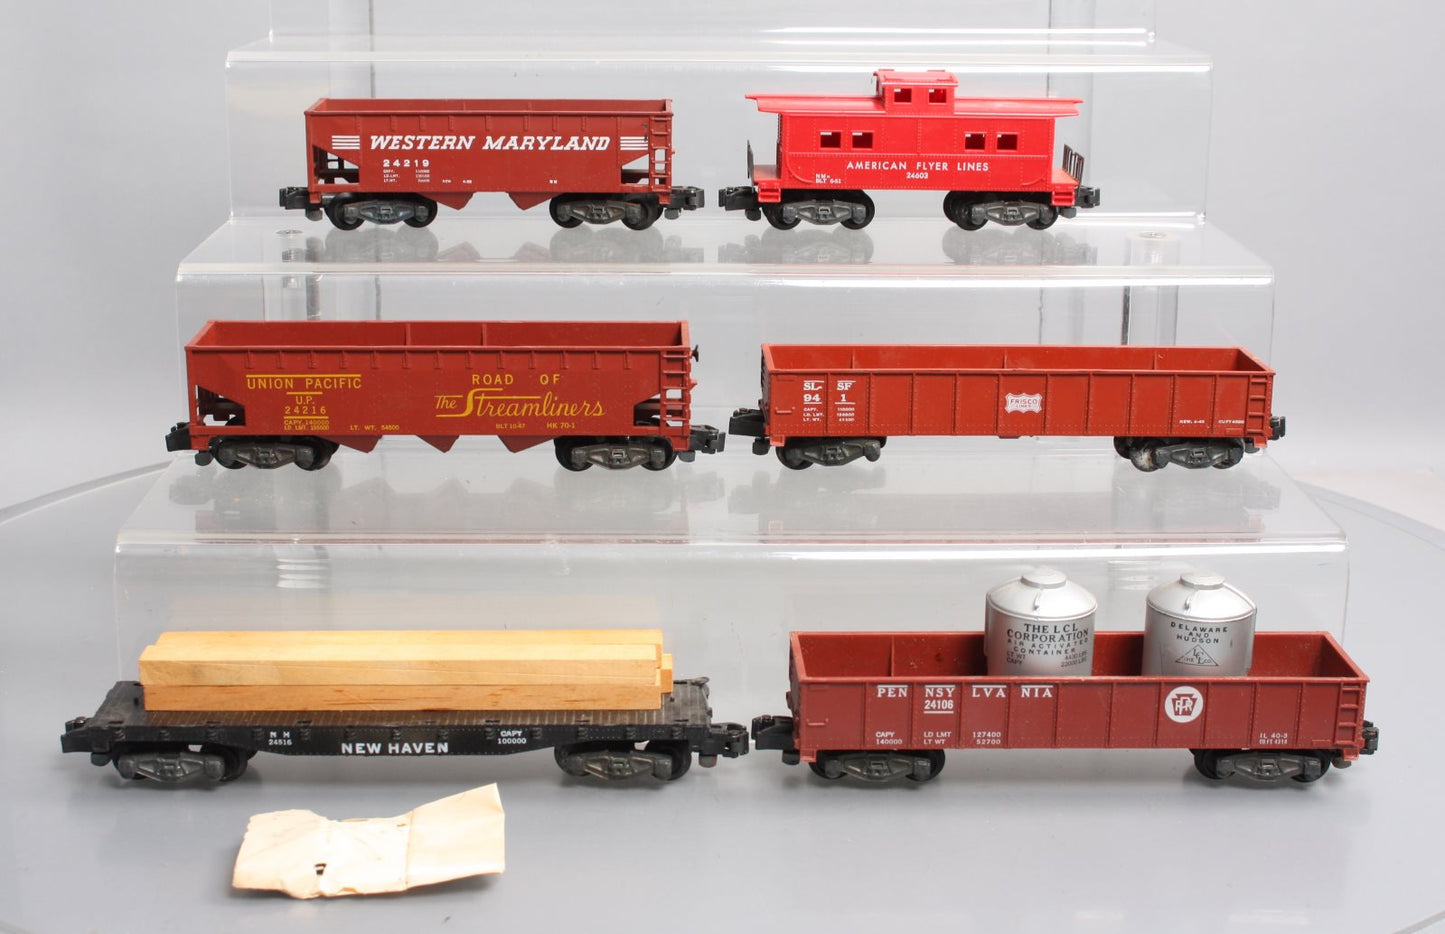 American Flyer 941, 24216, 24219, 24516, 24603 Vintage S Freight Cars [6] VG